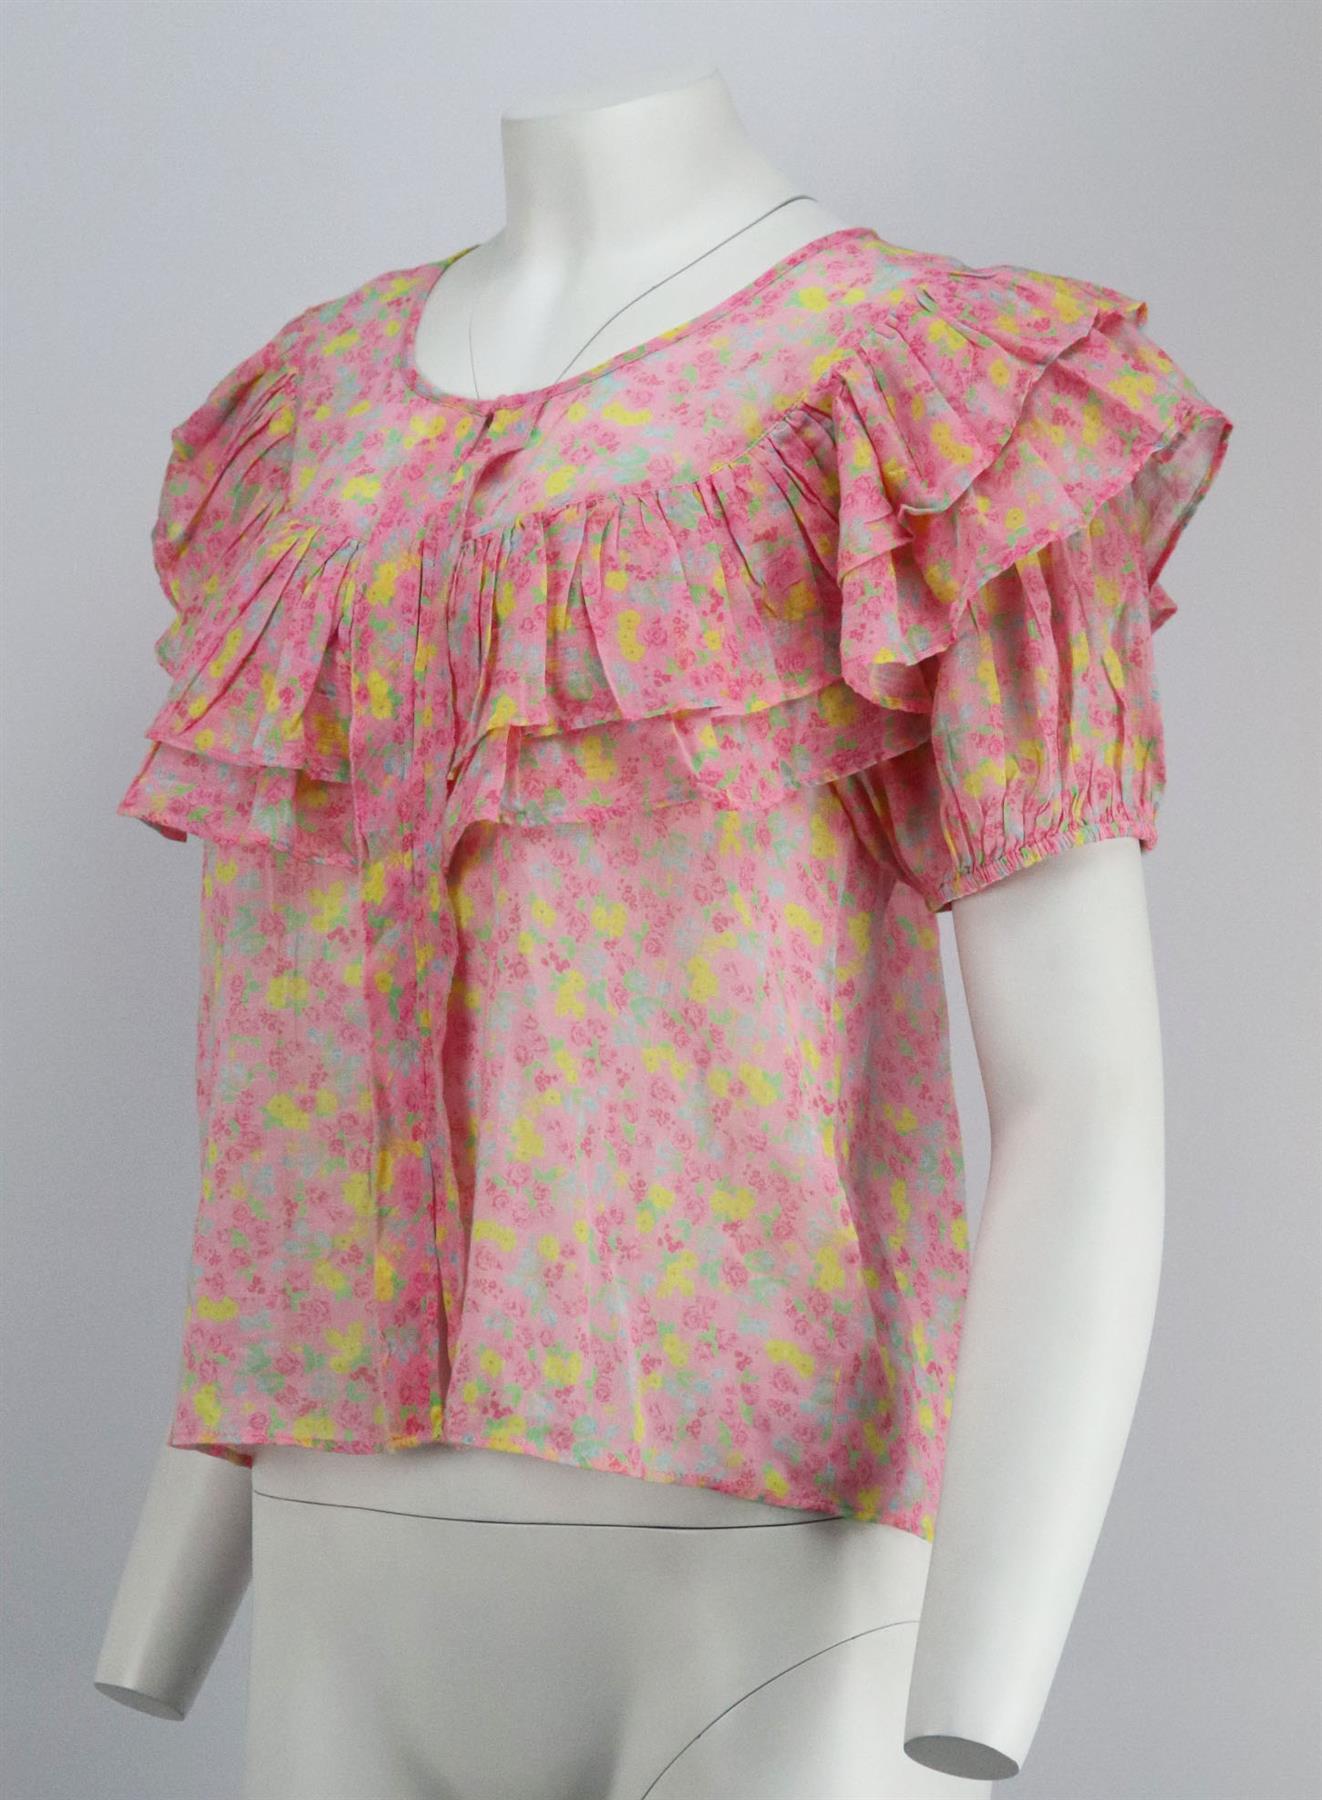 LOVESHACKFANCY RUFFLED FLORAL PRINT COTTON VOILE TOP SMALL